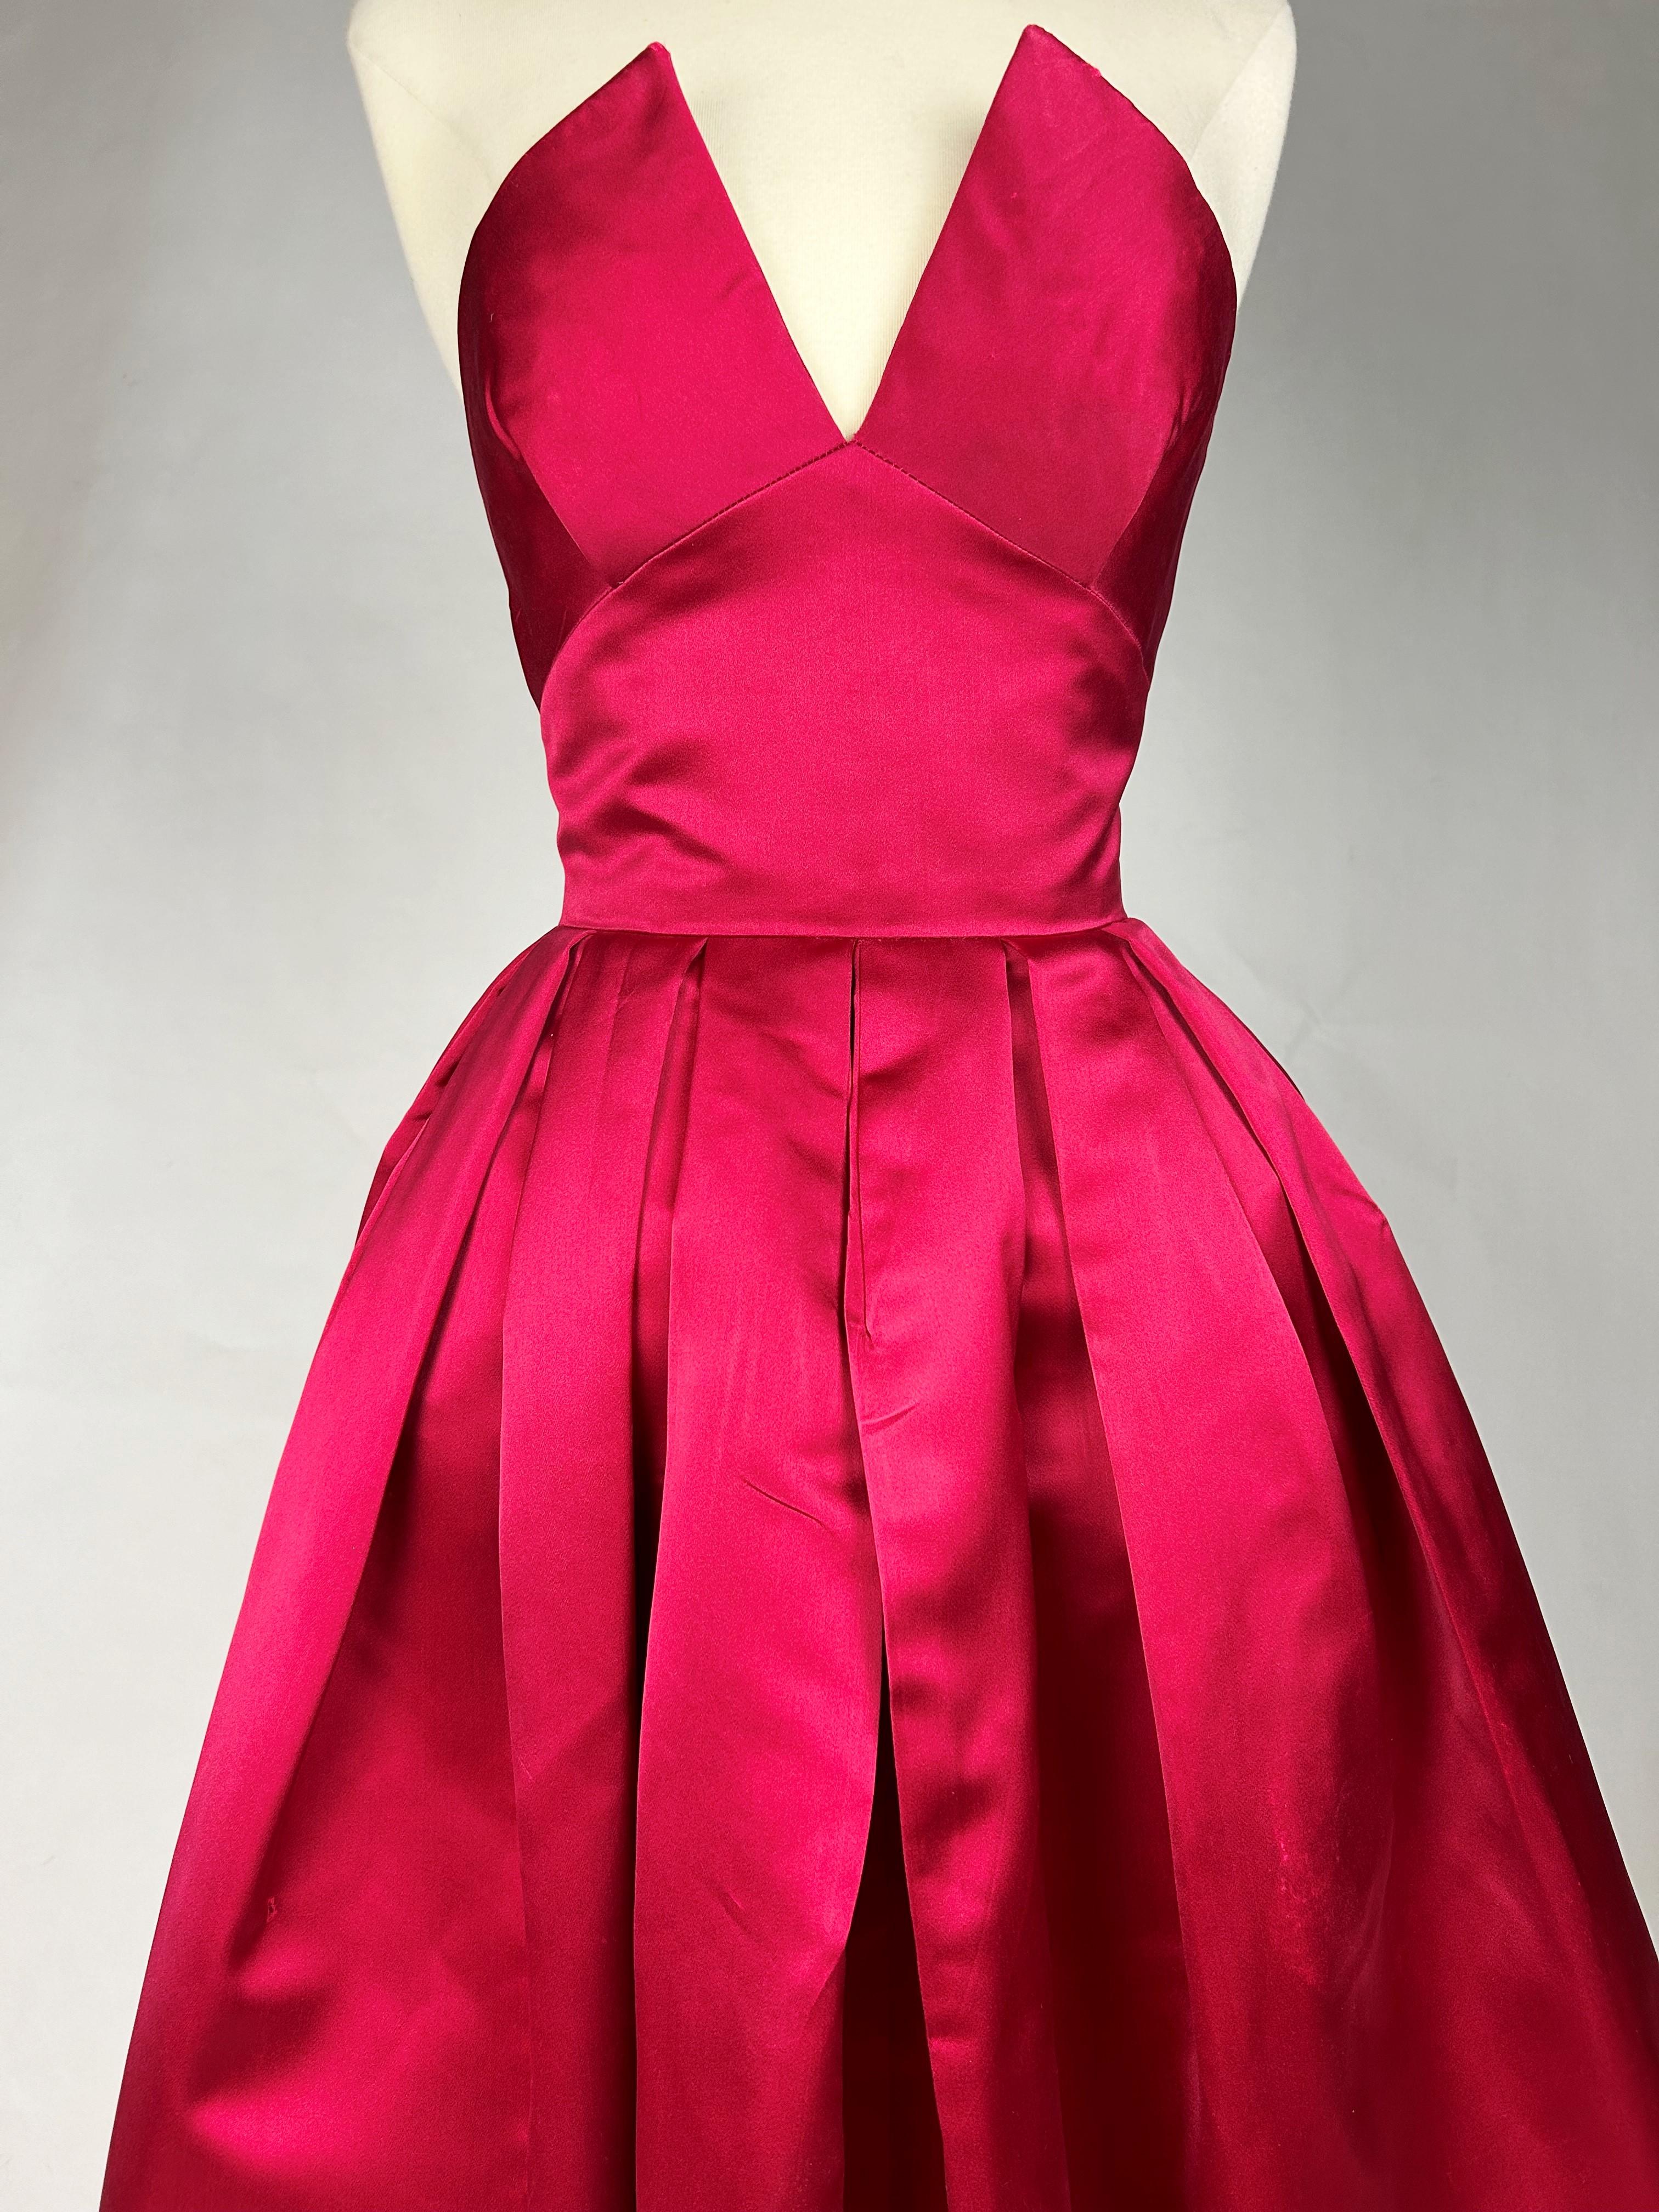 Cocktail dress in raspberry satin in the style of Christian Dior - Paris C. 1955 1